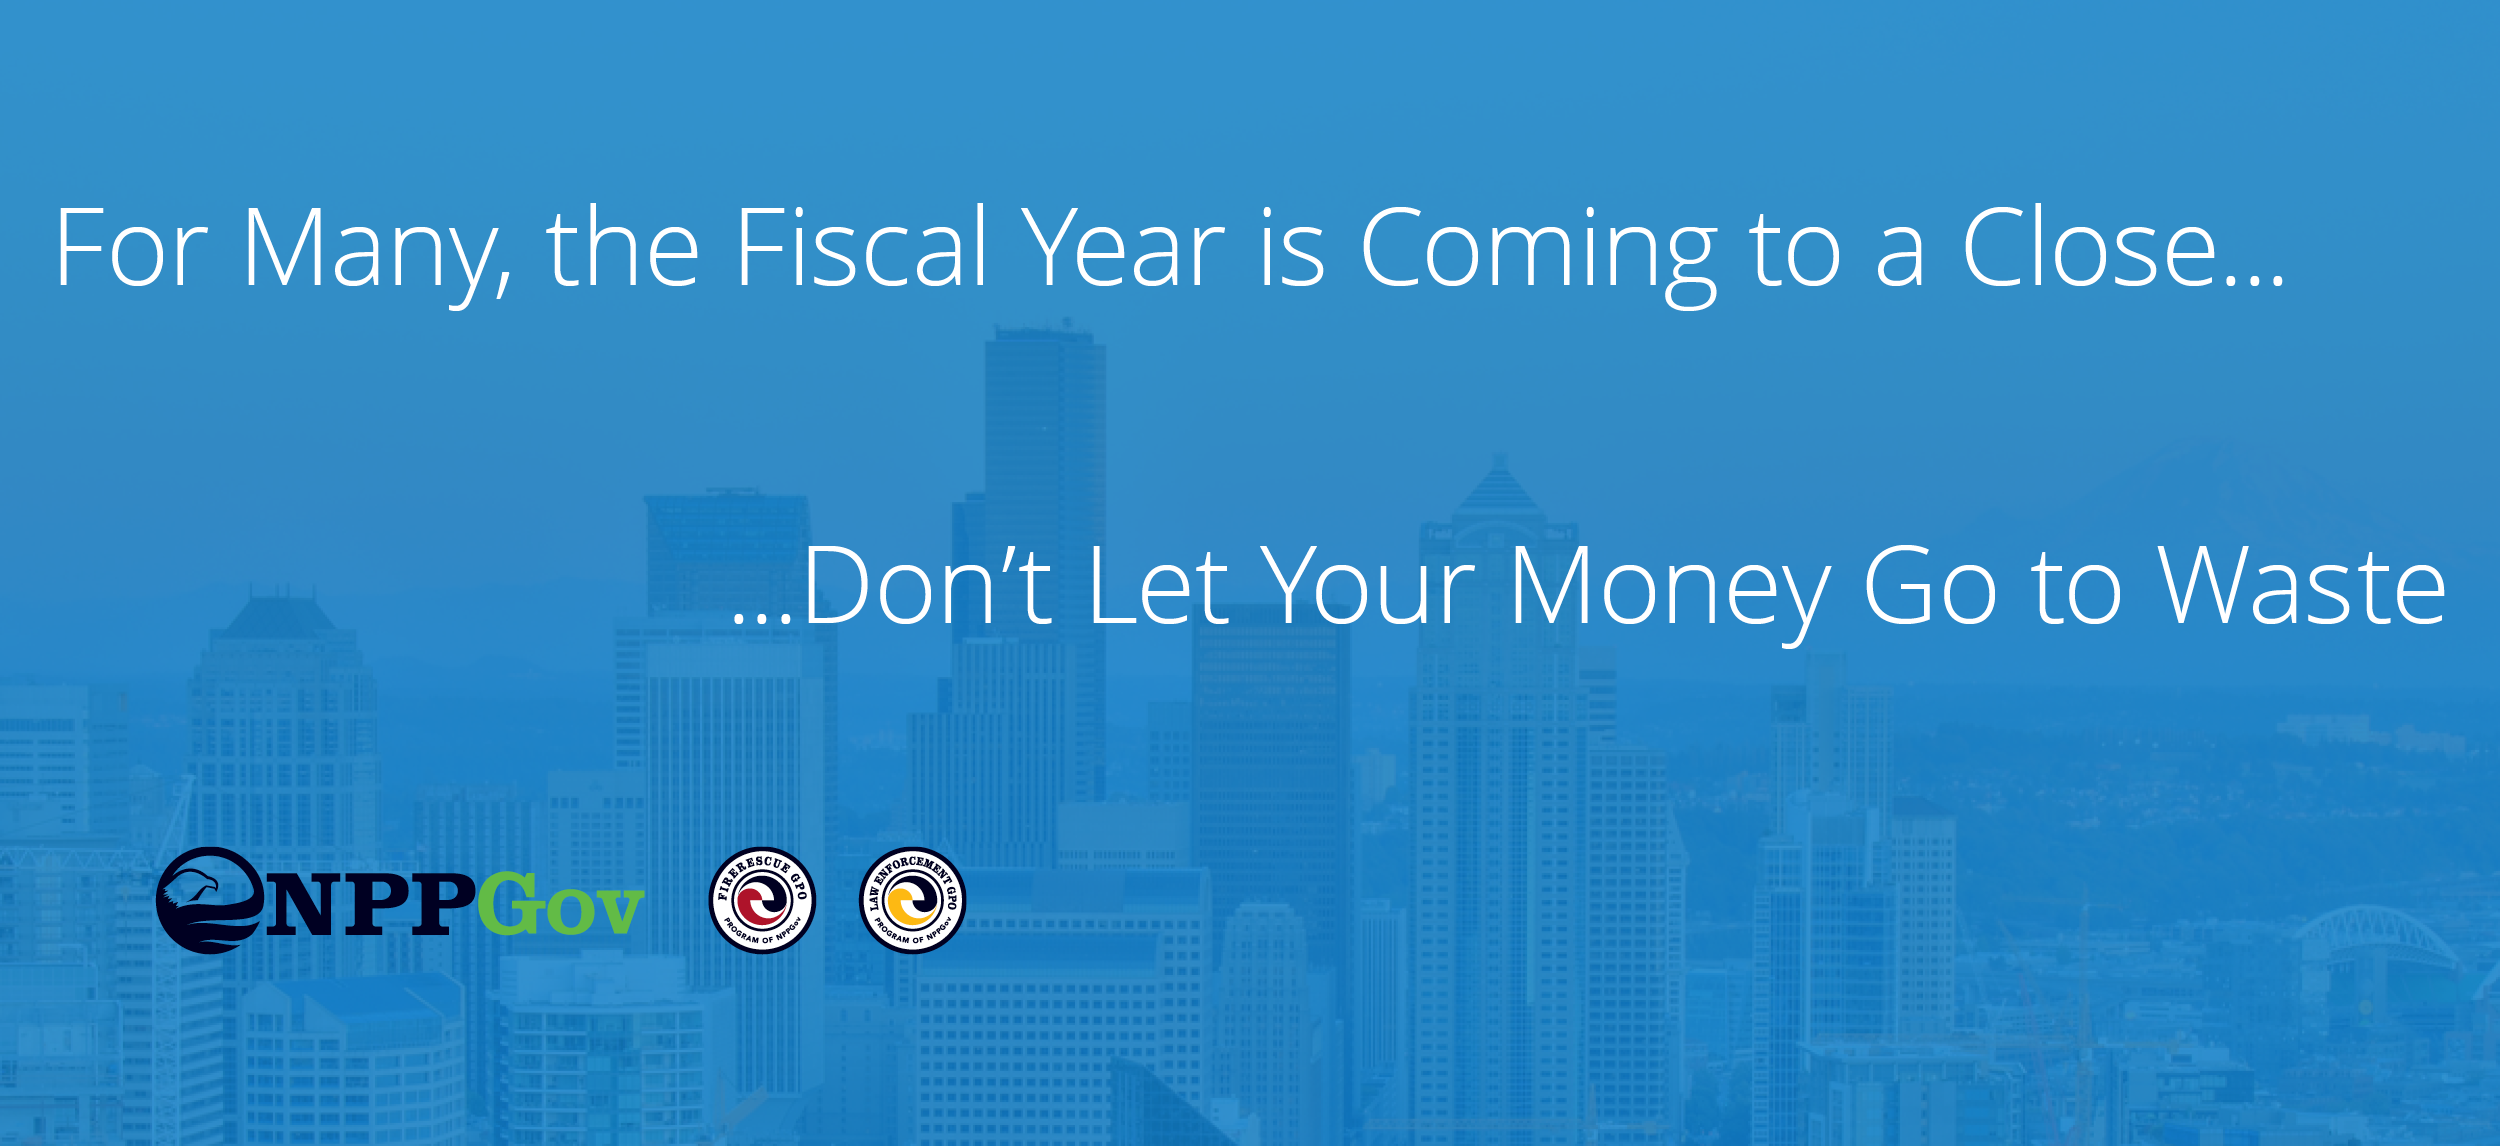 The Fiscal Year is Coming to an End and NPPGov Can Help